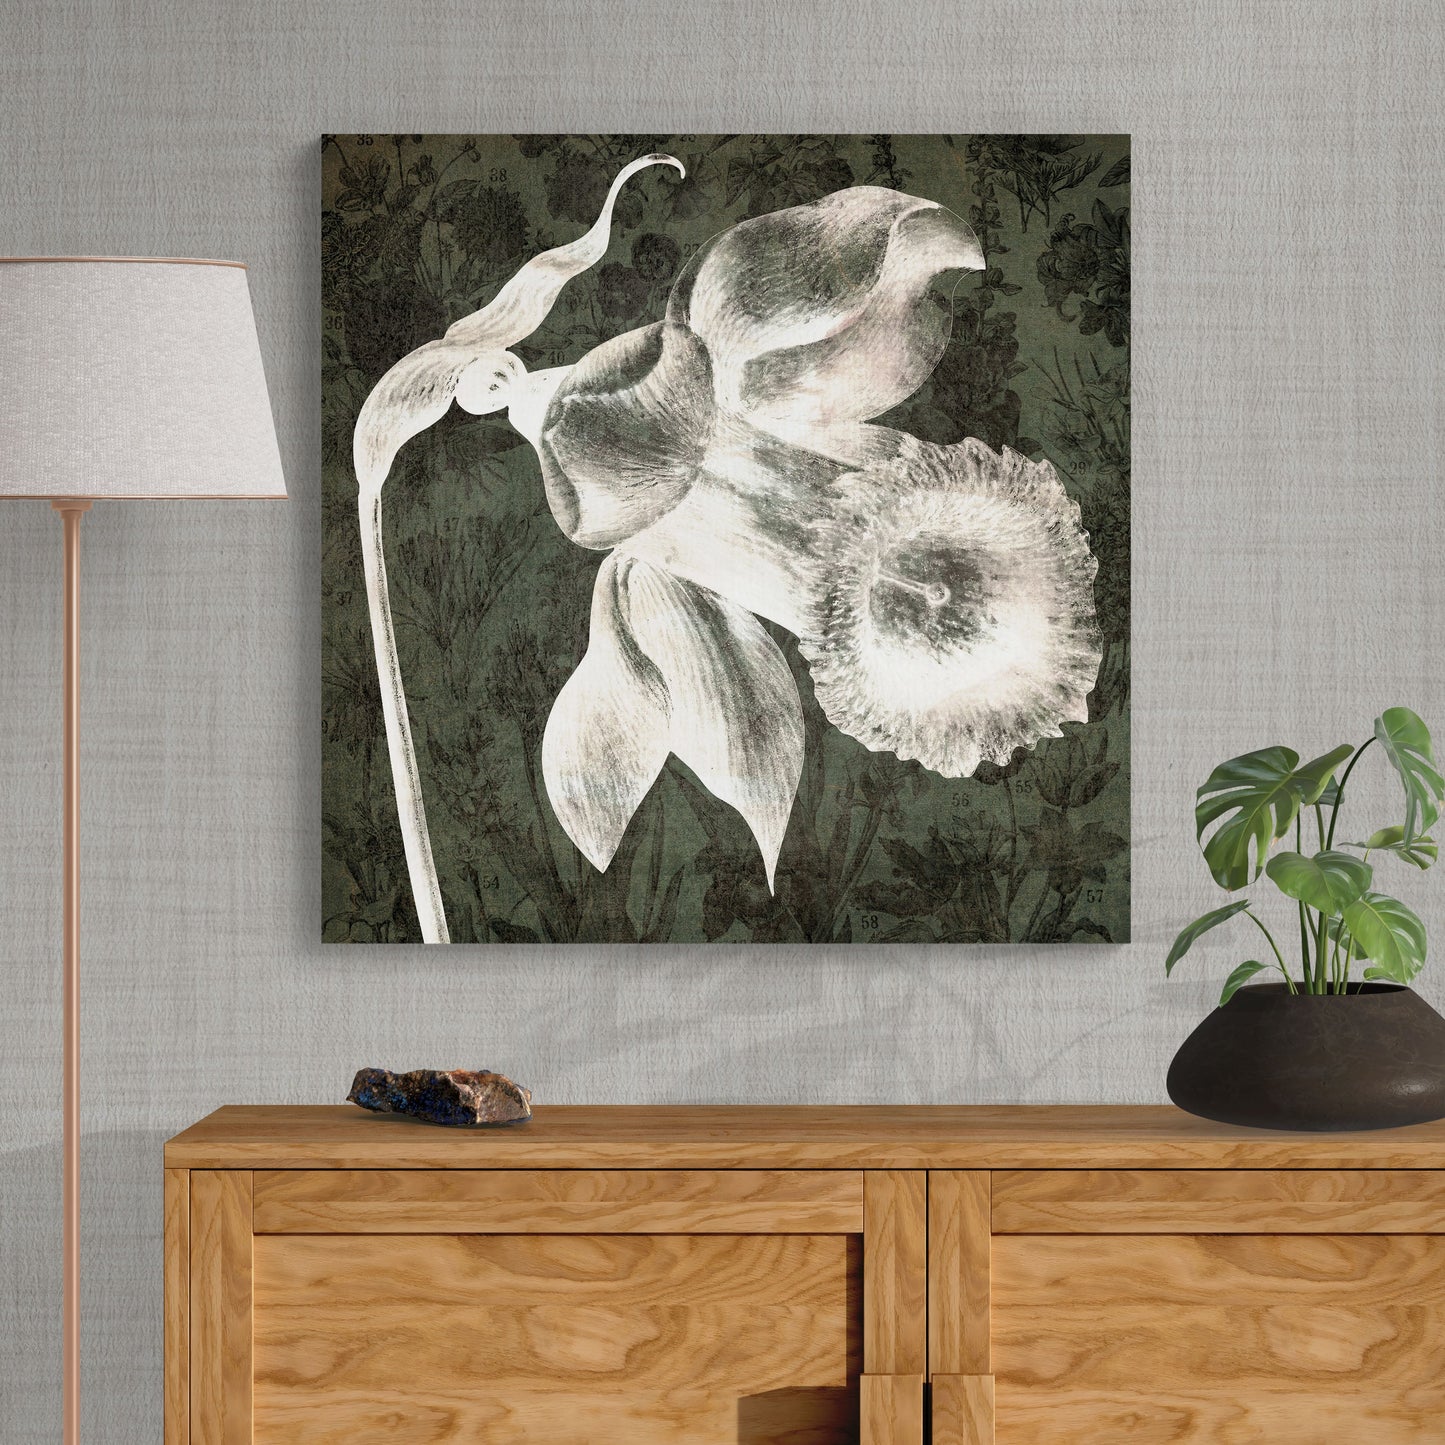 Neutral Tones of Nature - Daffodil Flower Wall Art - Retro Reverence